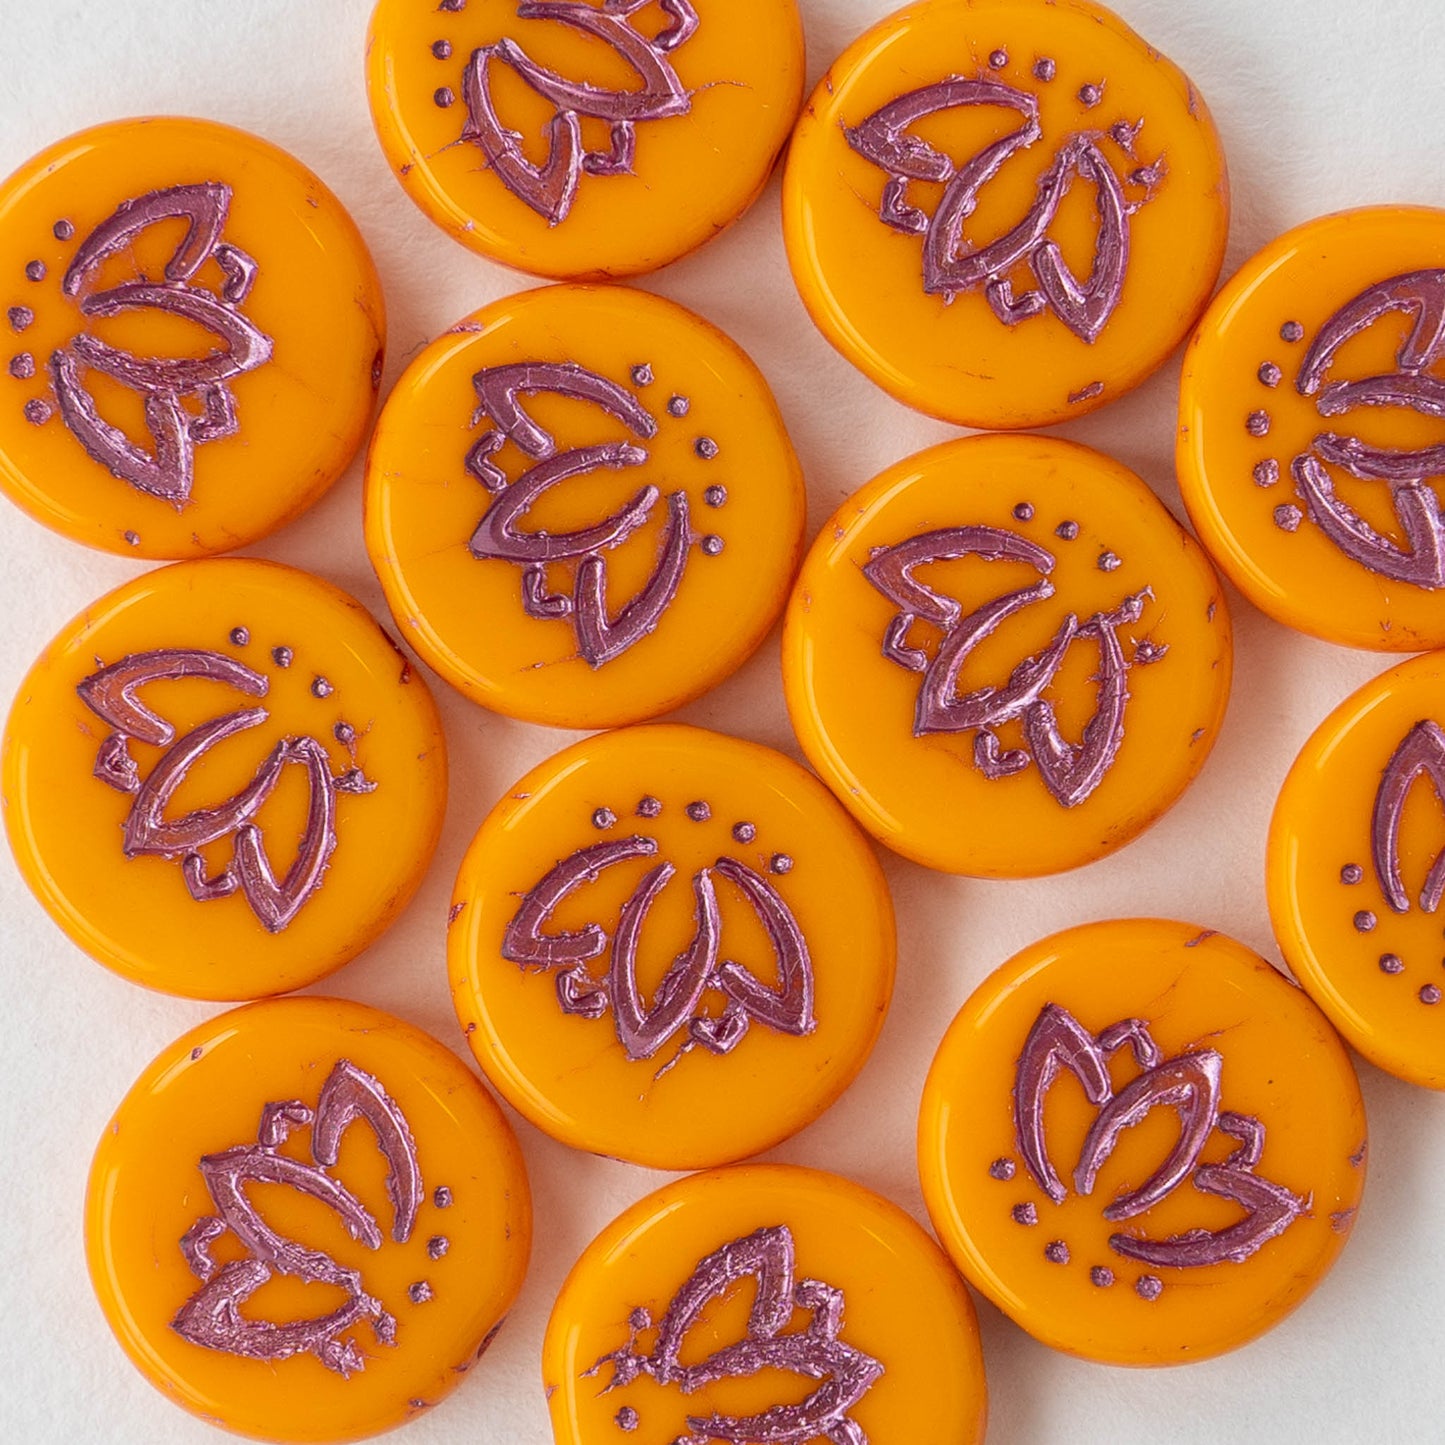 14mm Lotus Flower Coin Beads - Orange with Pink Wash - 12